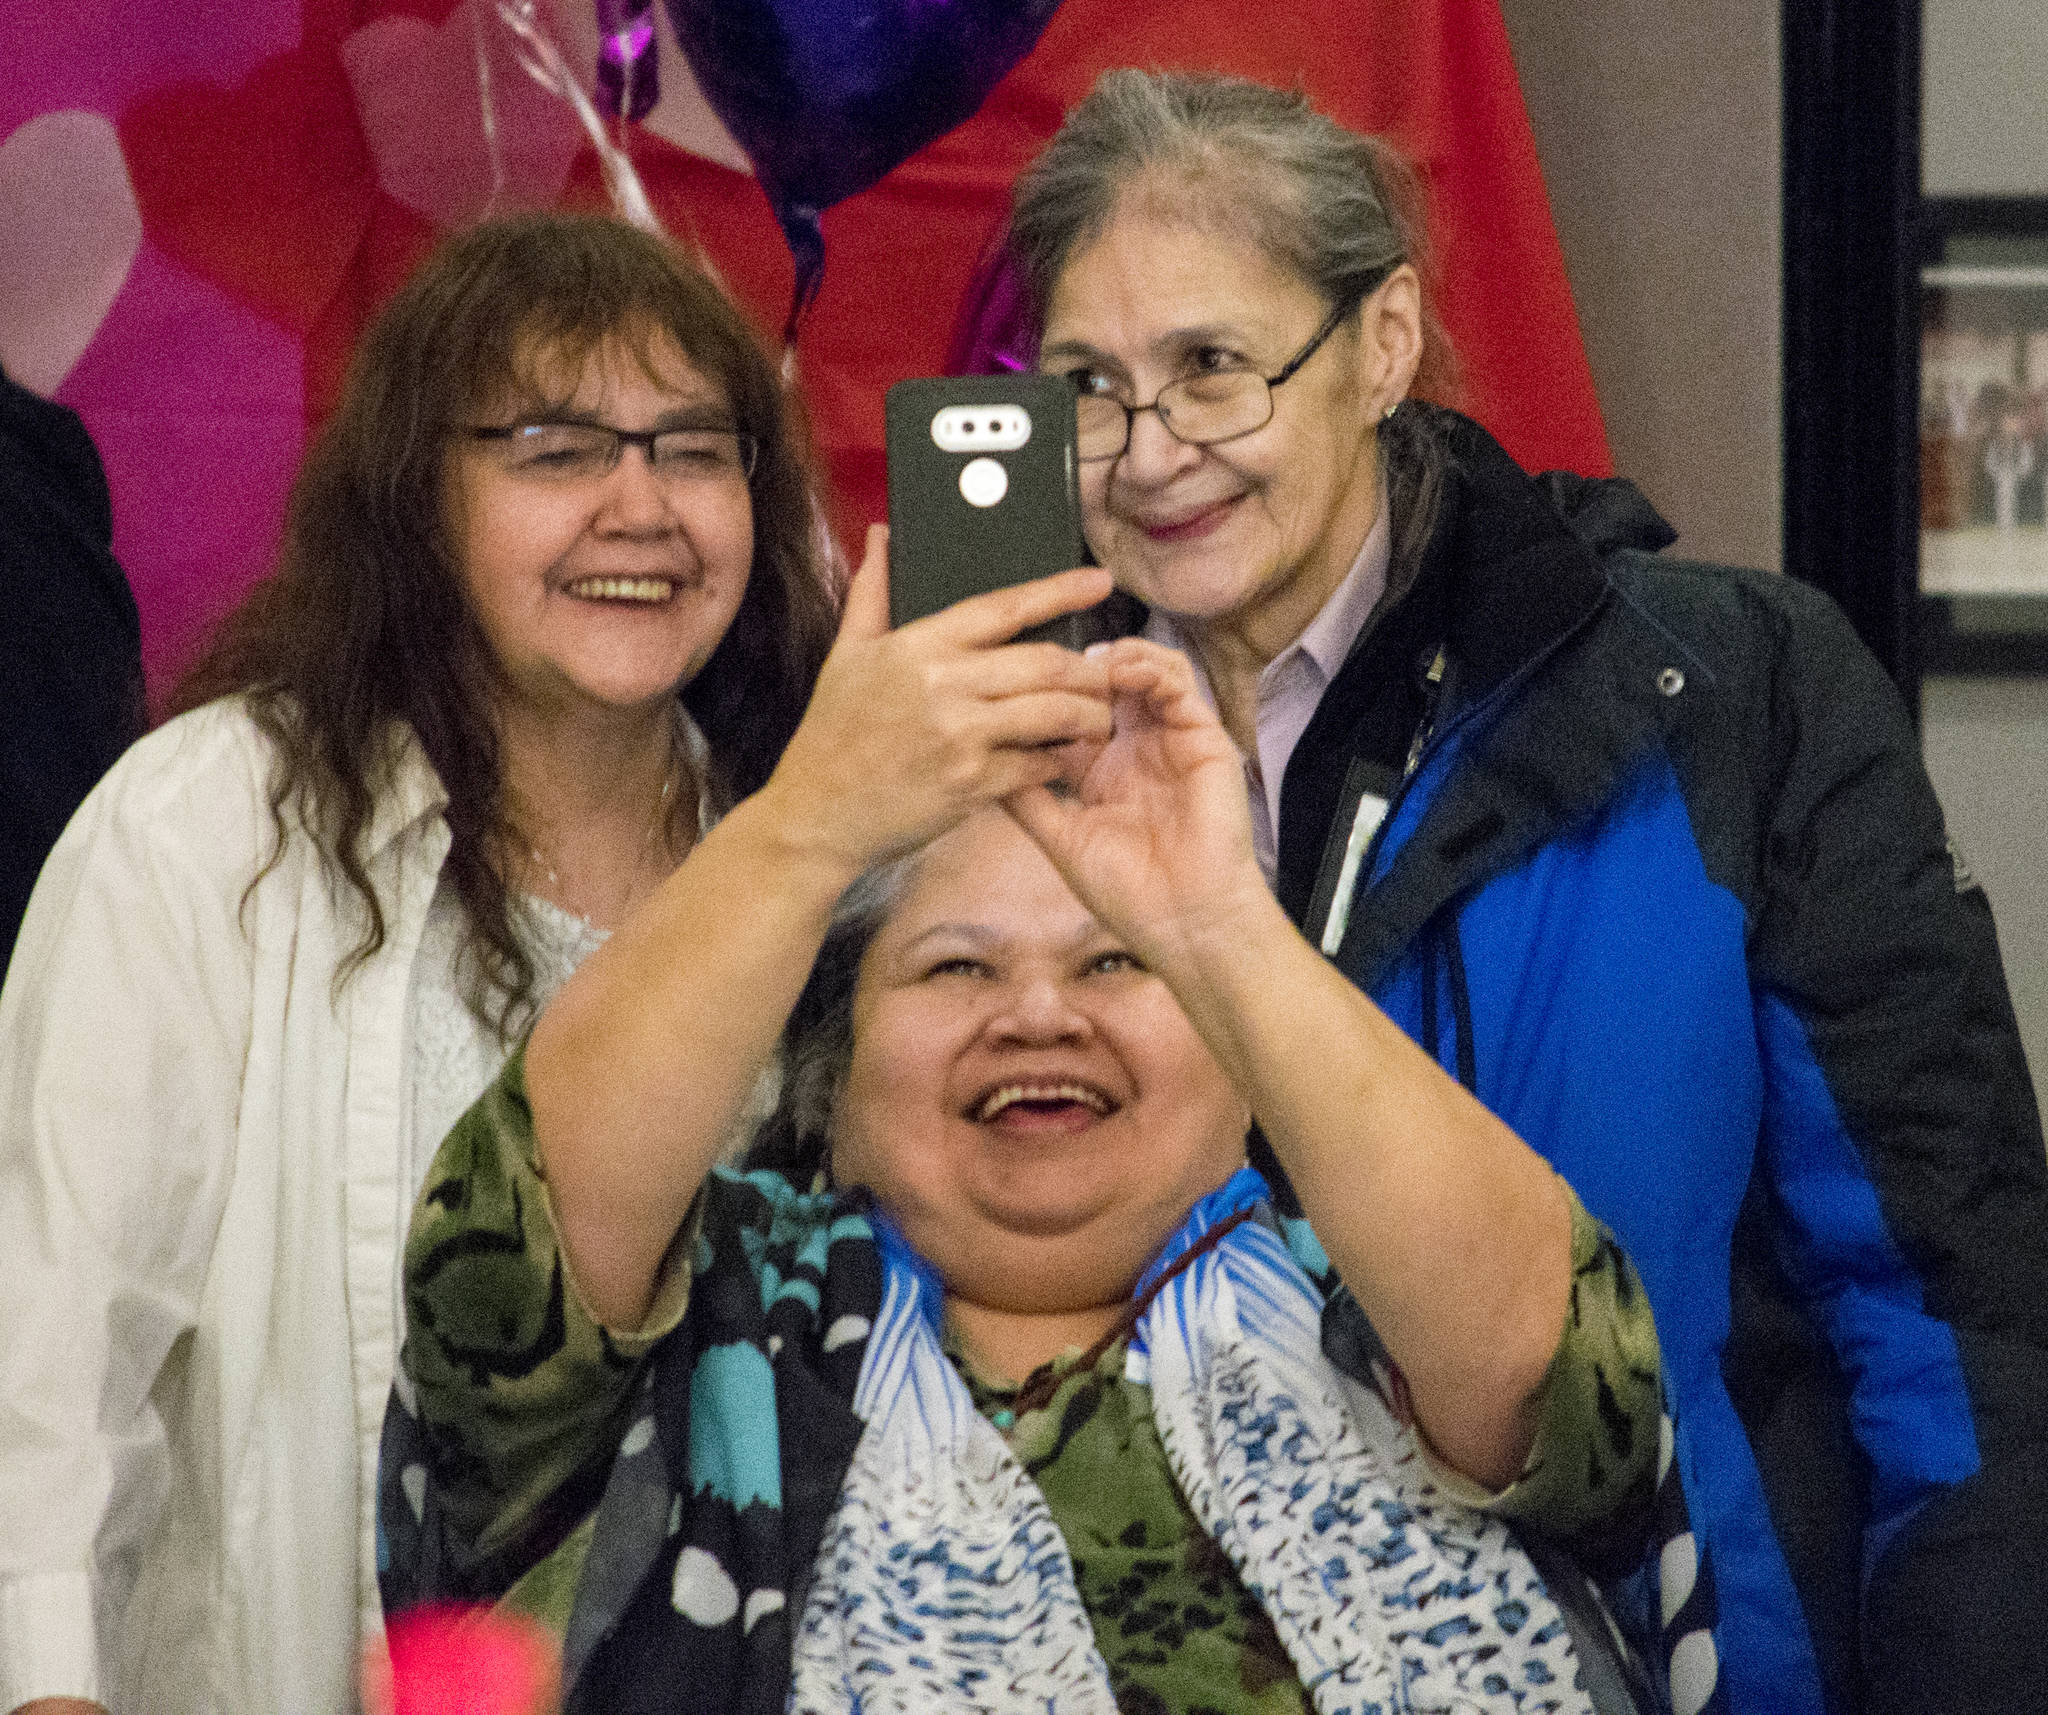 Jacqui Cropley takes a selfie with Jeannie Lee, left, and Vivian Hotch at the Tlingit-Haida Community Council’s Elders Valentine’s Day Dance on Thursday. (Richard McGrail | Juneau Empire)